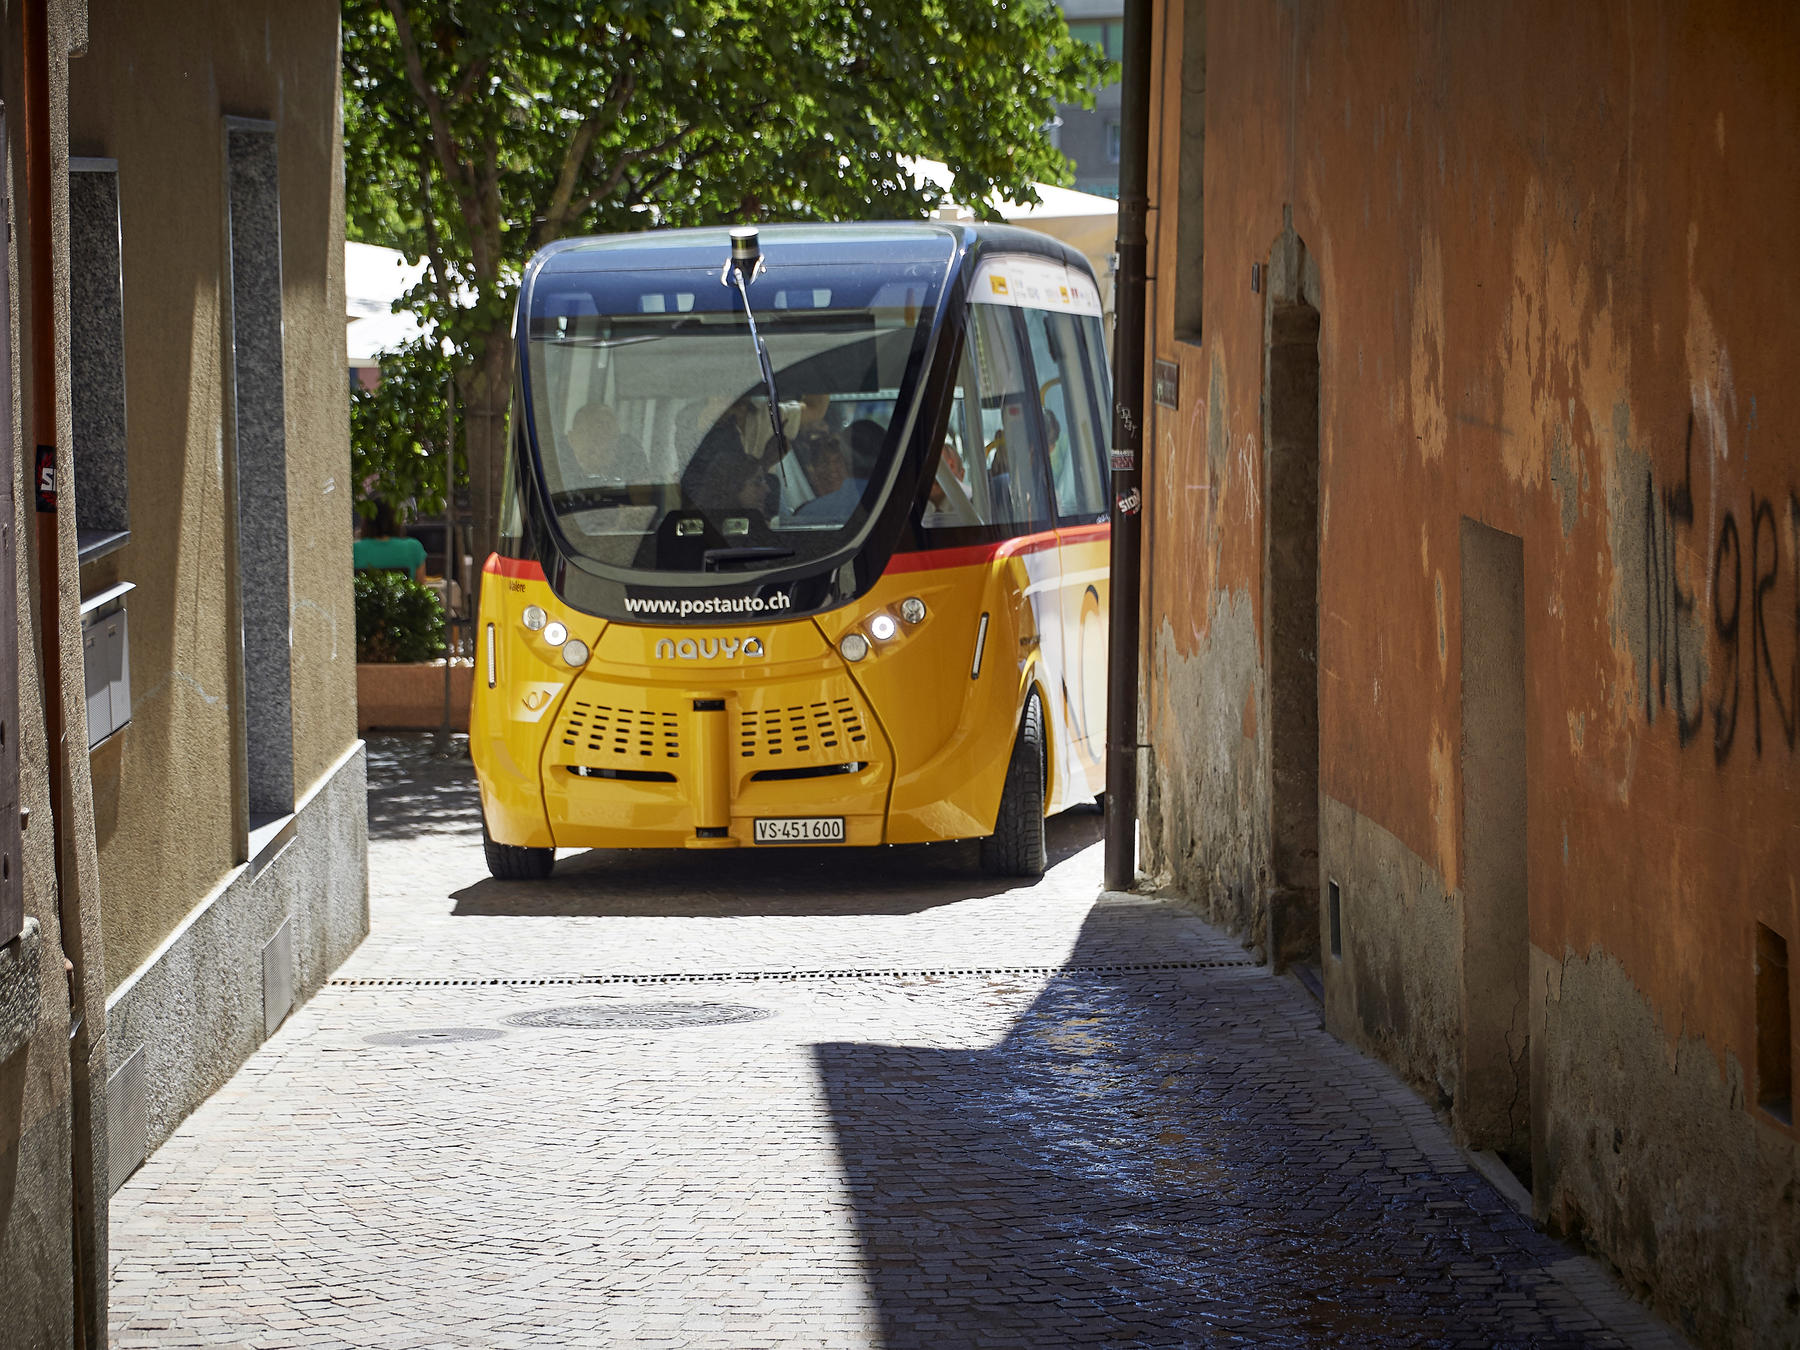 For nearly two years, two driverless shuttles have operated between the city center and train stations in the Swiss town of Sion. (Image: PostBus)